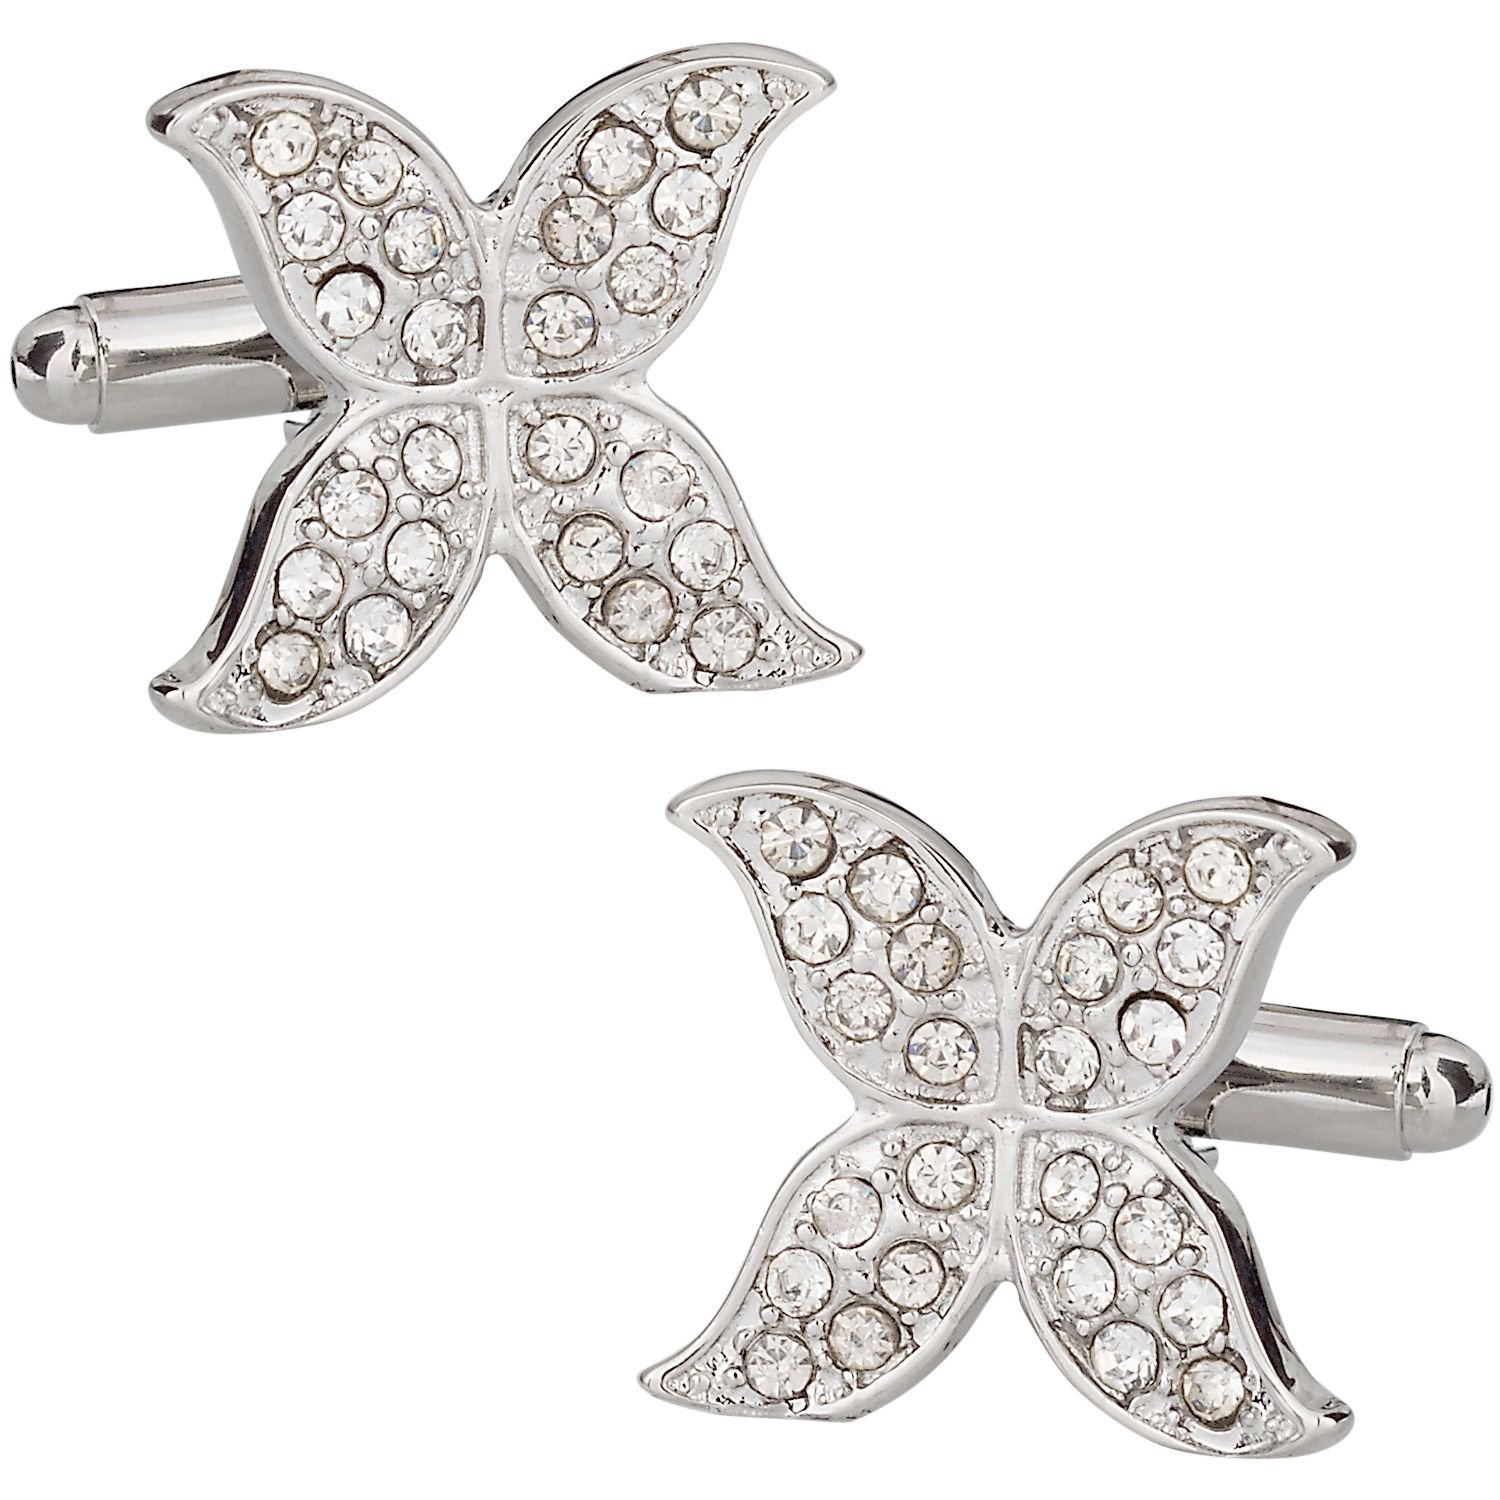 Crystal Butterfly Cufflinks with Travel Presentation Gift Box